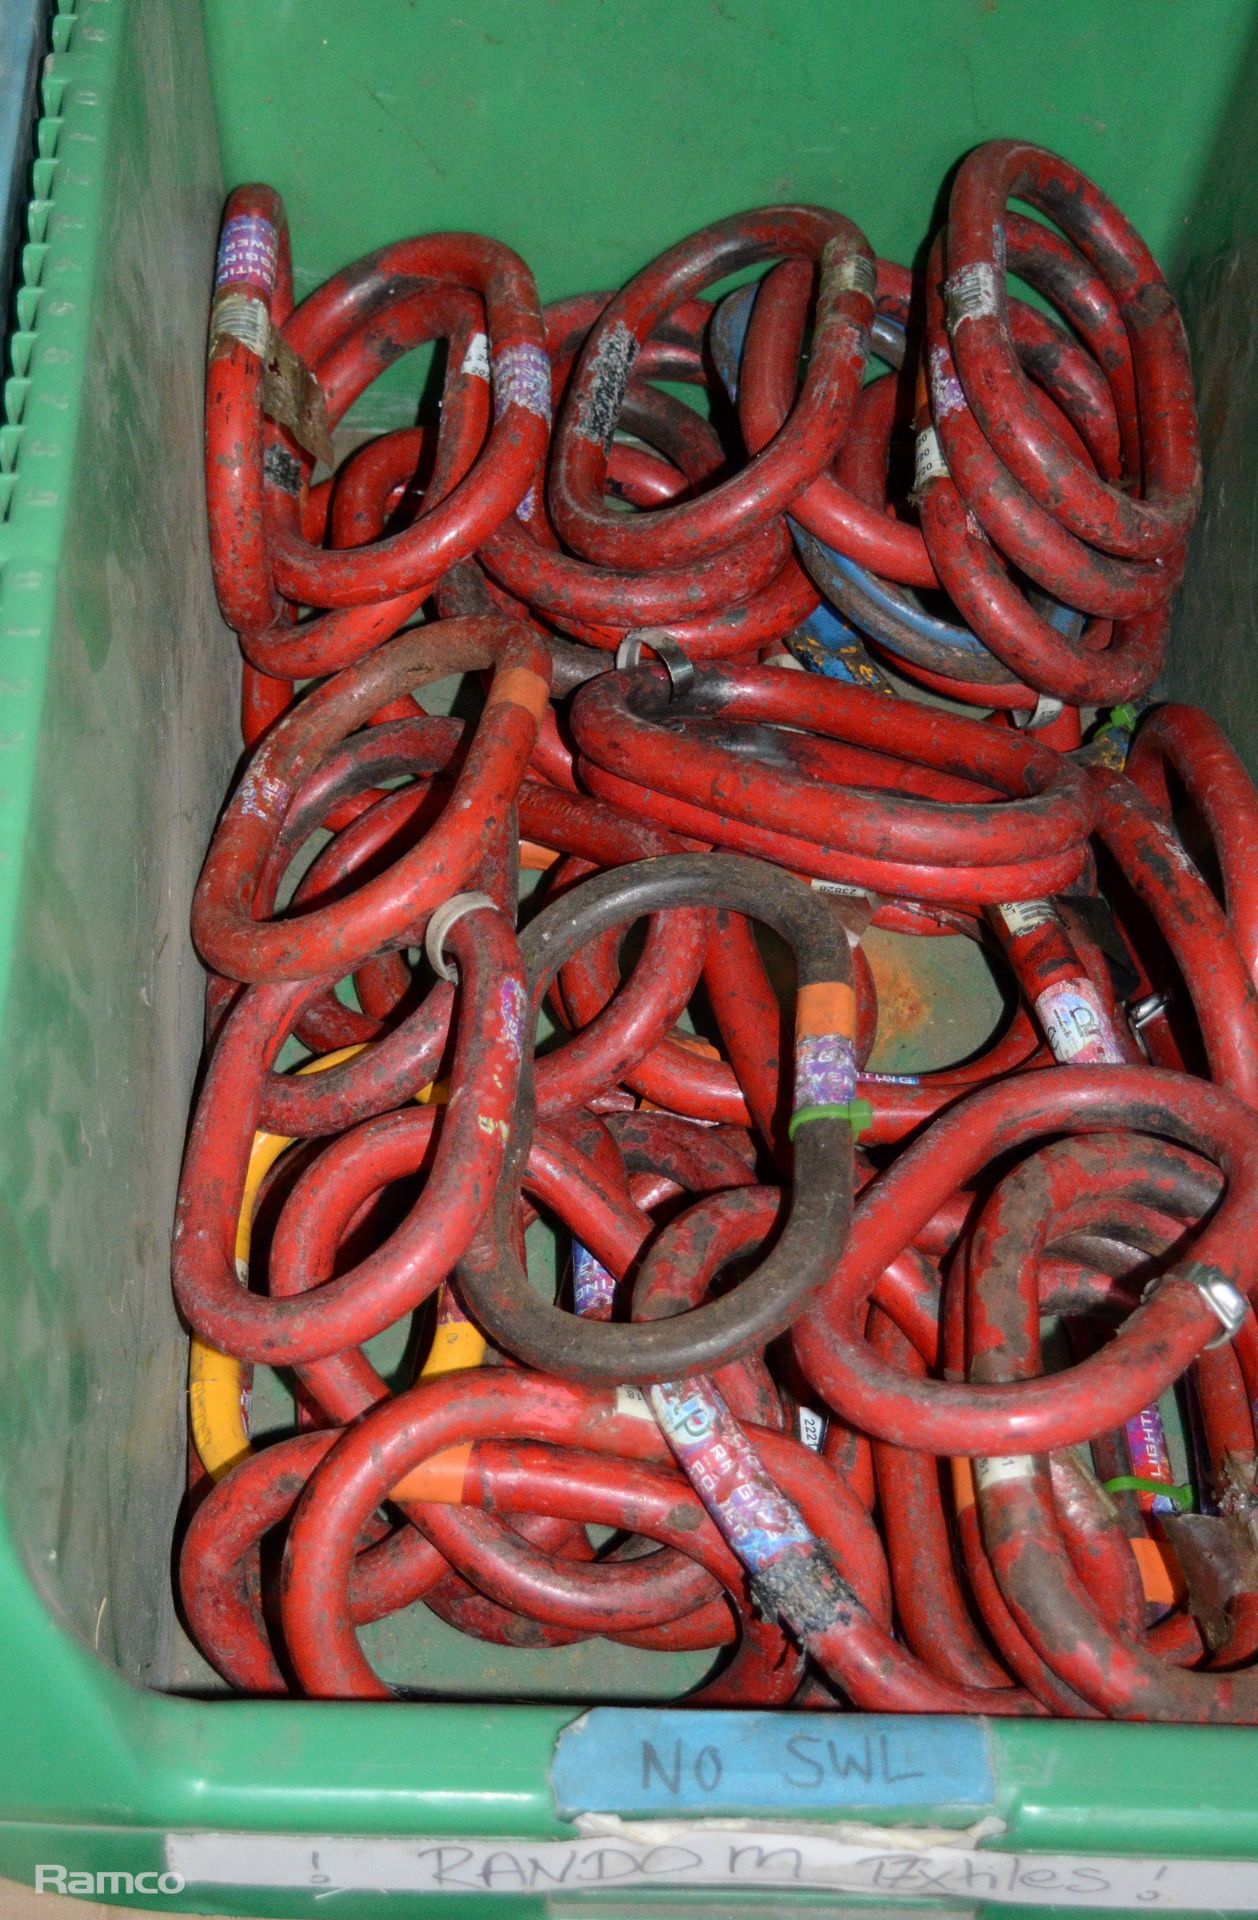 Lifting equipment - D-shackles, stack chain, metal rings - Image 4 of 6